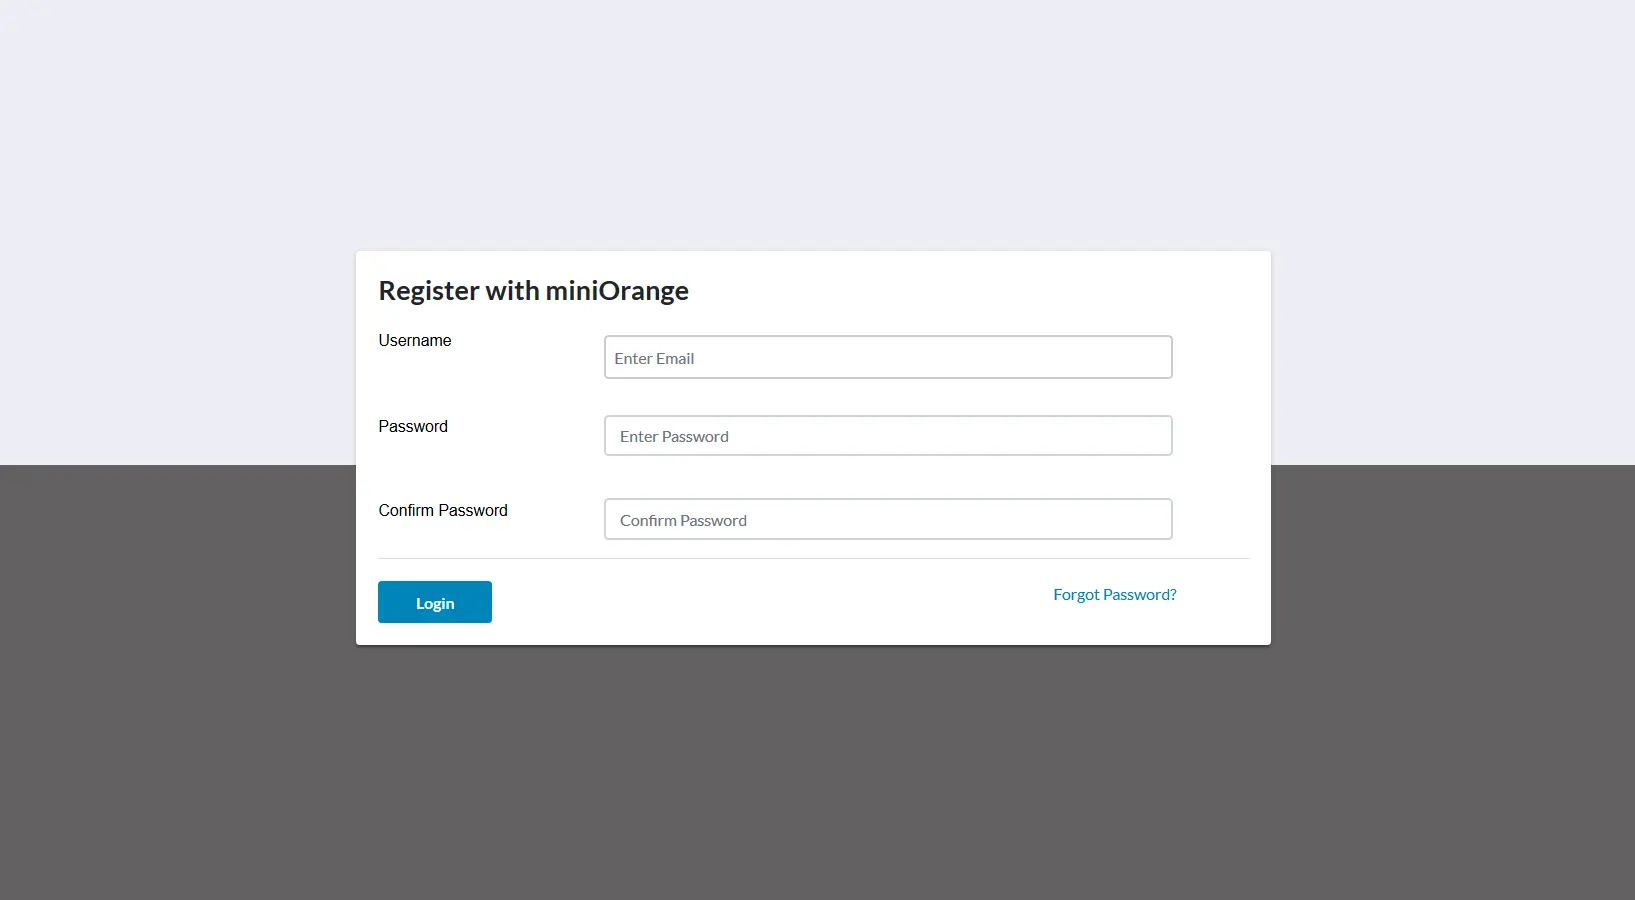 ASP.NET OAuth Middleware using WildApricot as OAuth Server - Registration Page